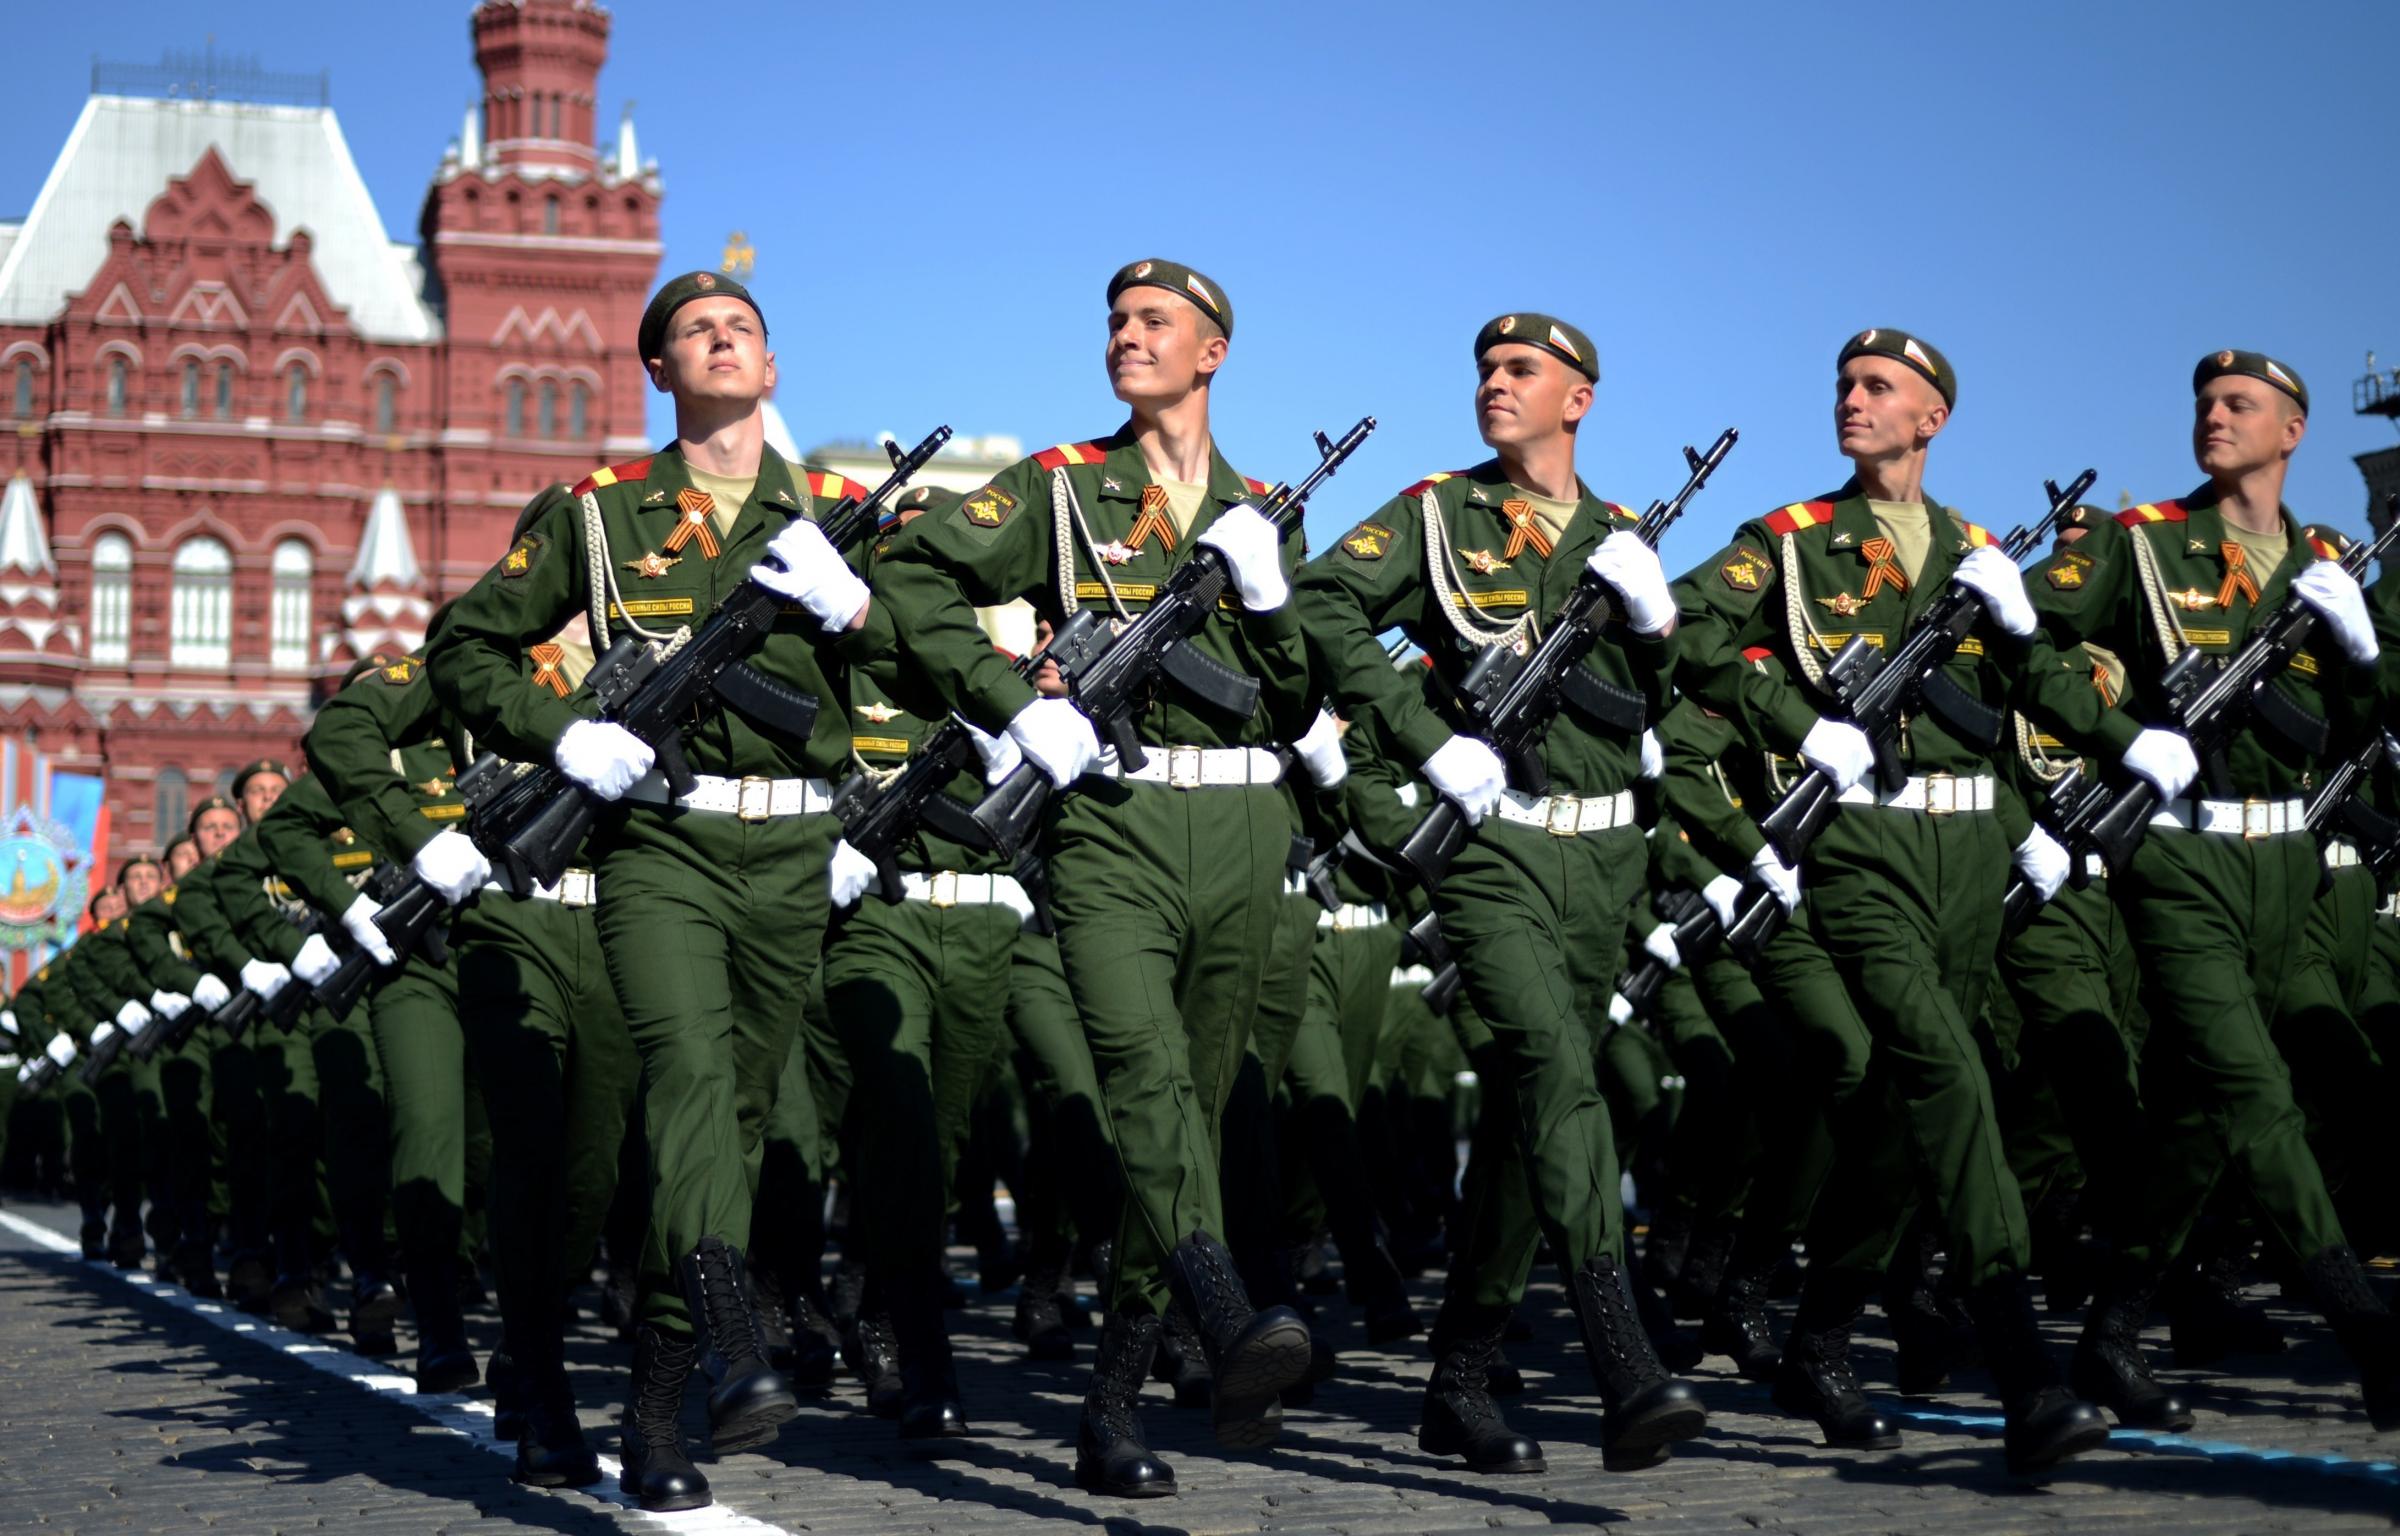 Russia Shows Off Military In Red Square Victory Day Parade | WLRN